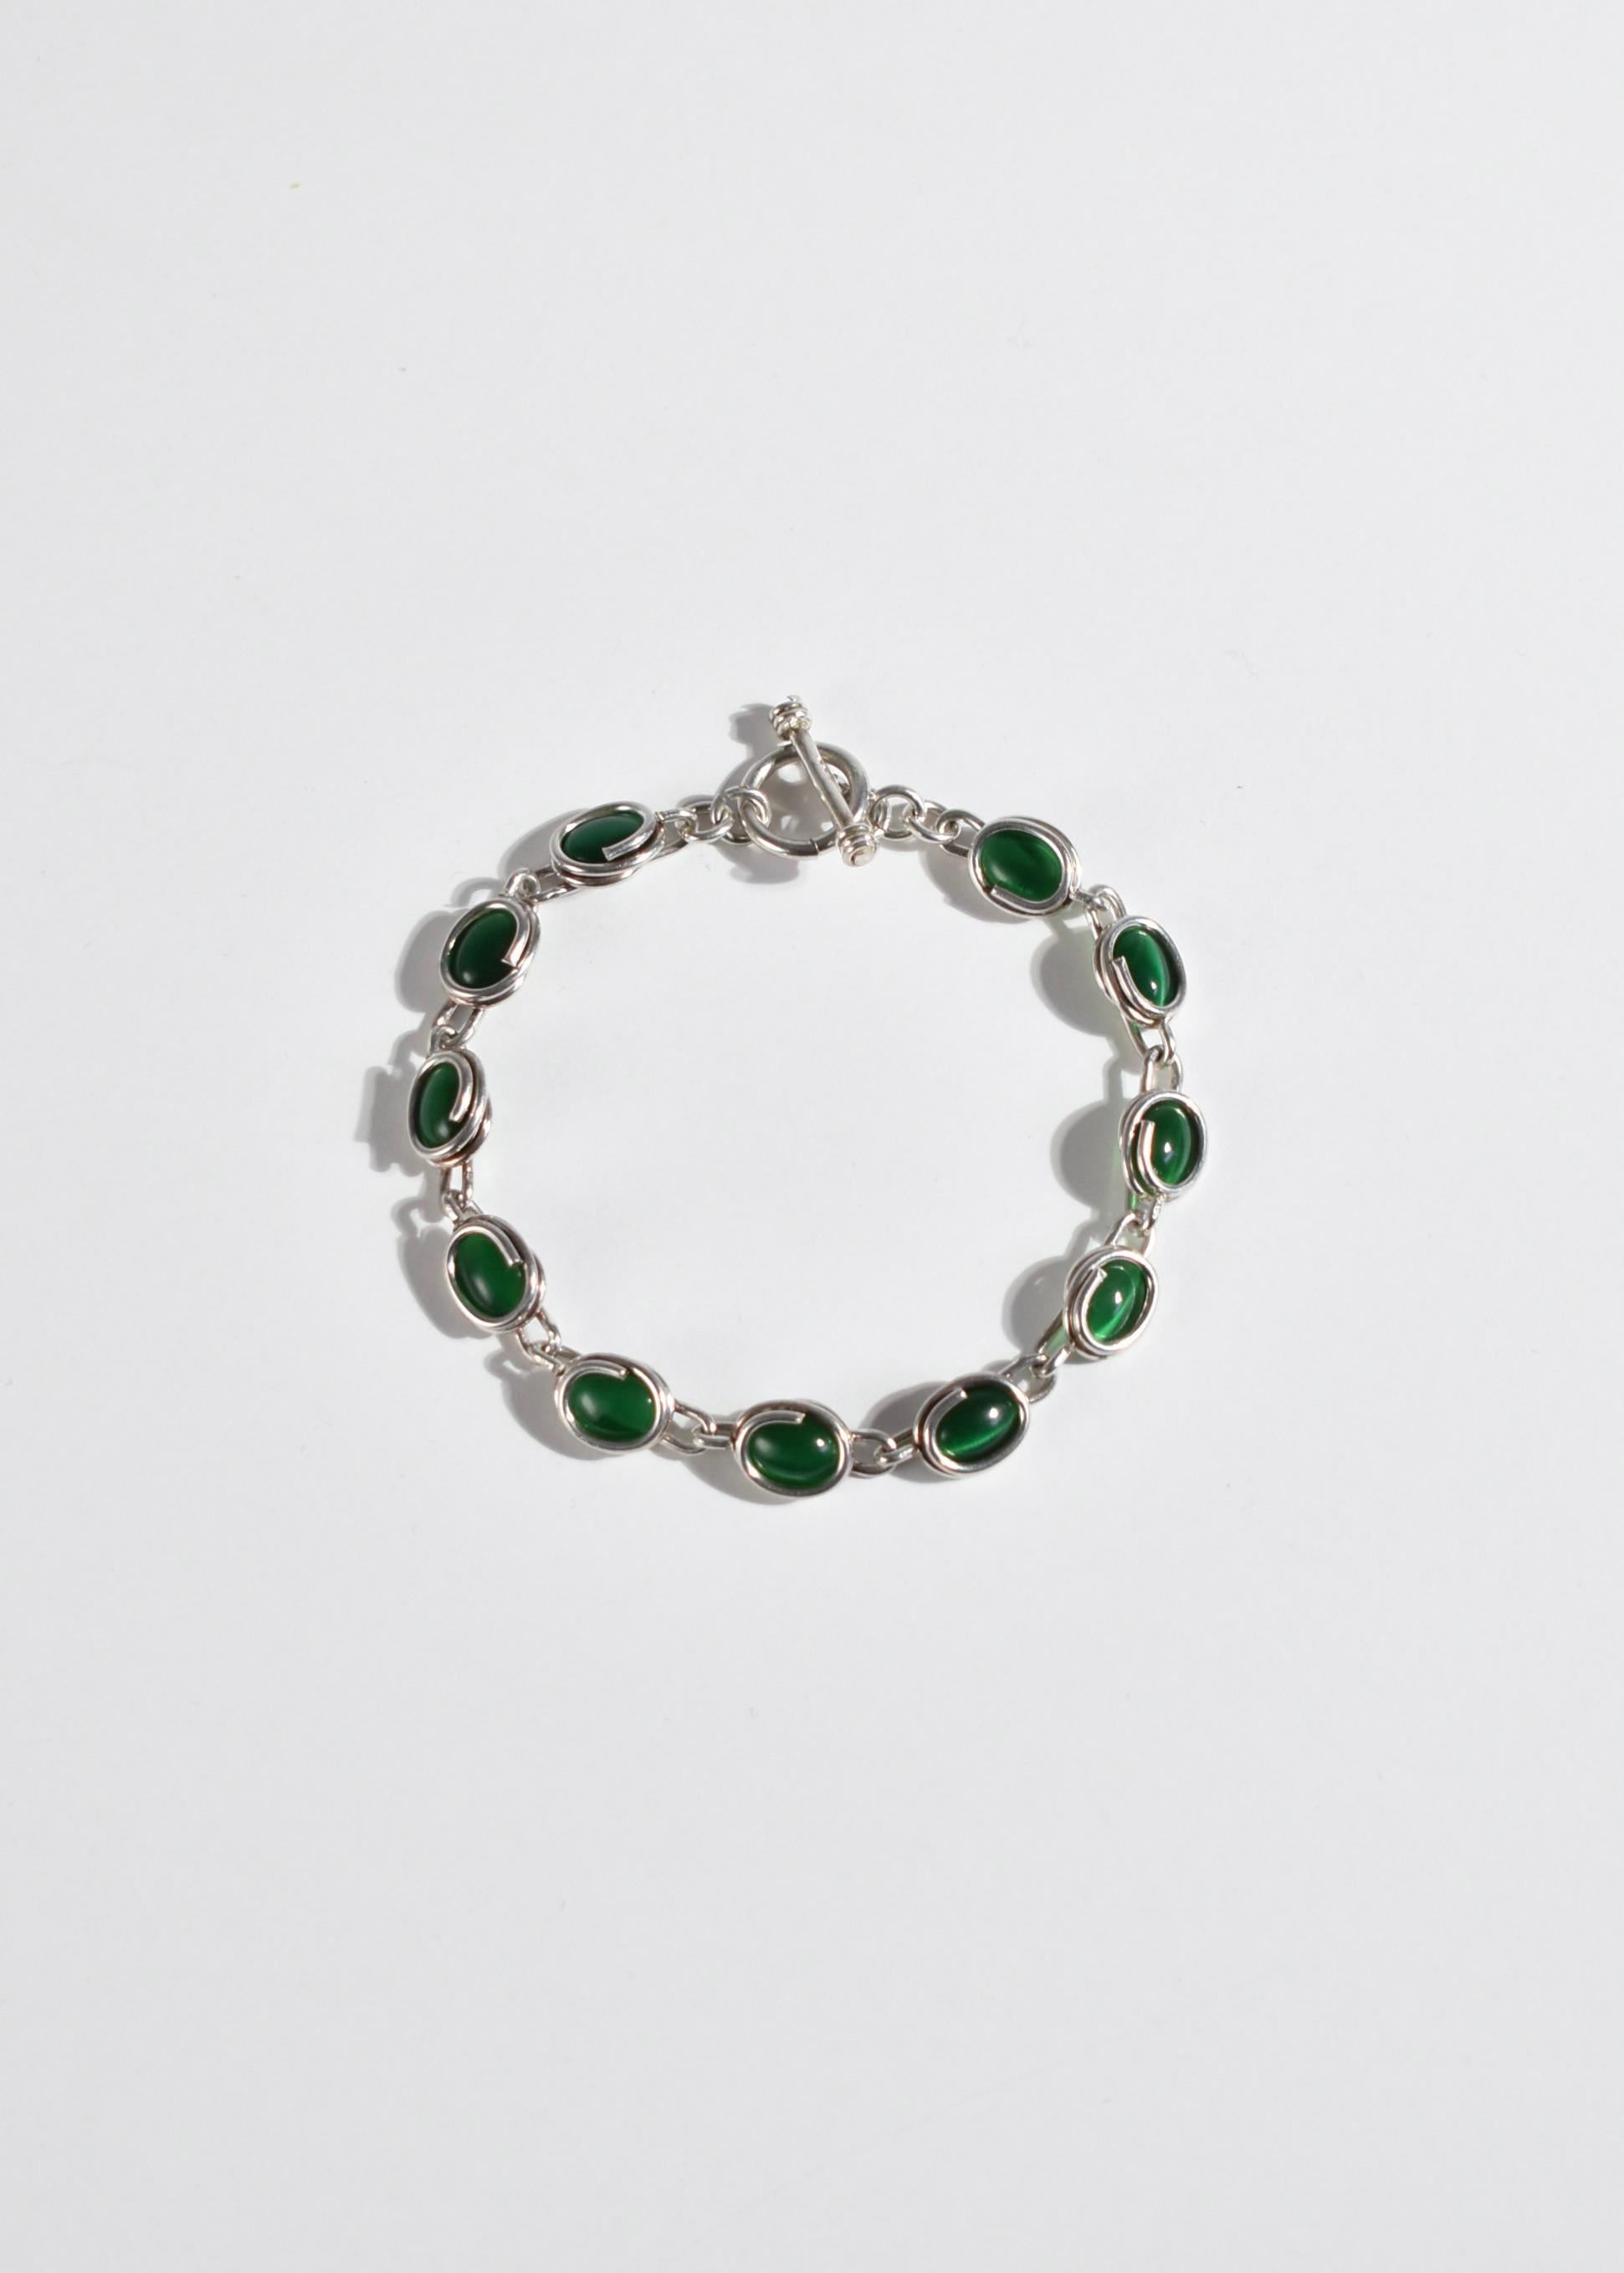 Vintage silver link bracelet with green cat's eye cabochon detail and toggle closure. Stamped 925.

Material: Sterling silver, green cat's eye.